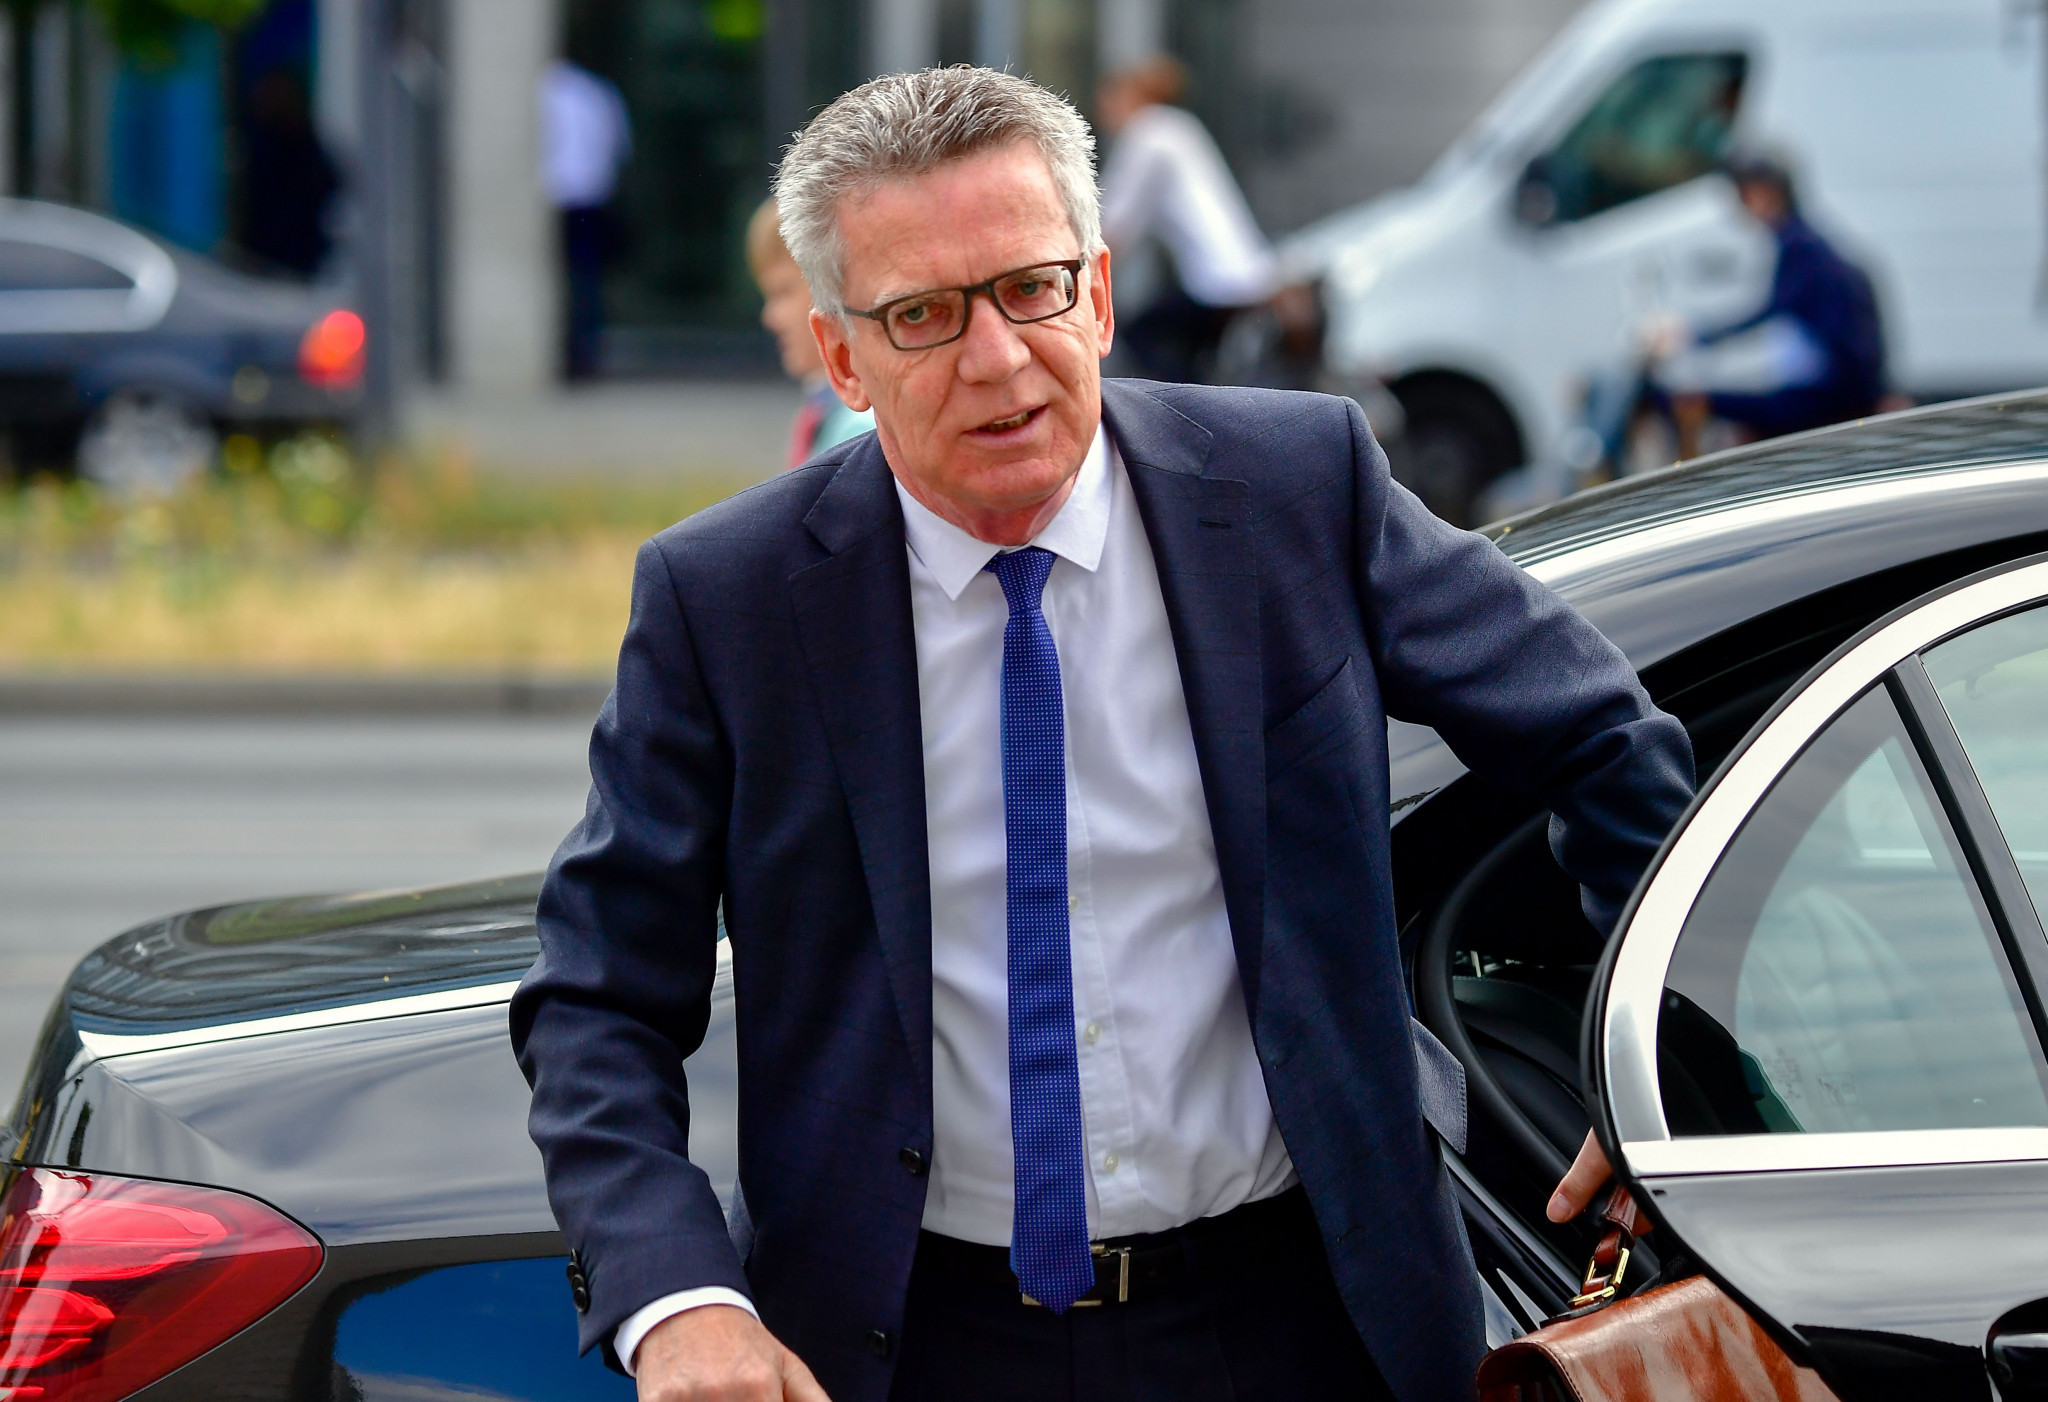 The Ethics Commission, led by Thomas de Maizière, will investigate the allegations ©Getty Images